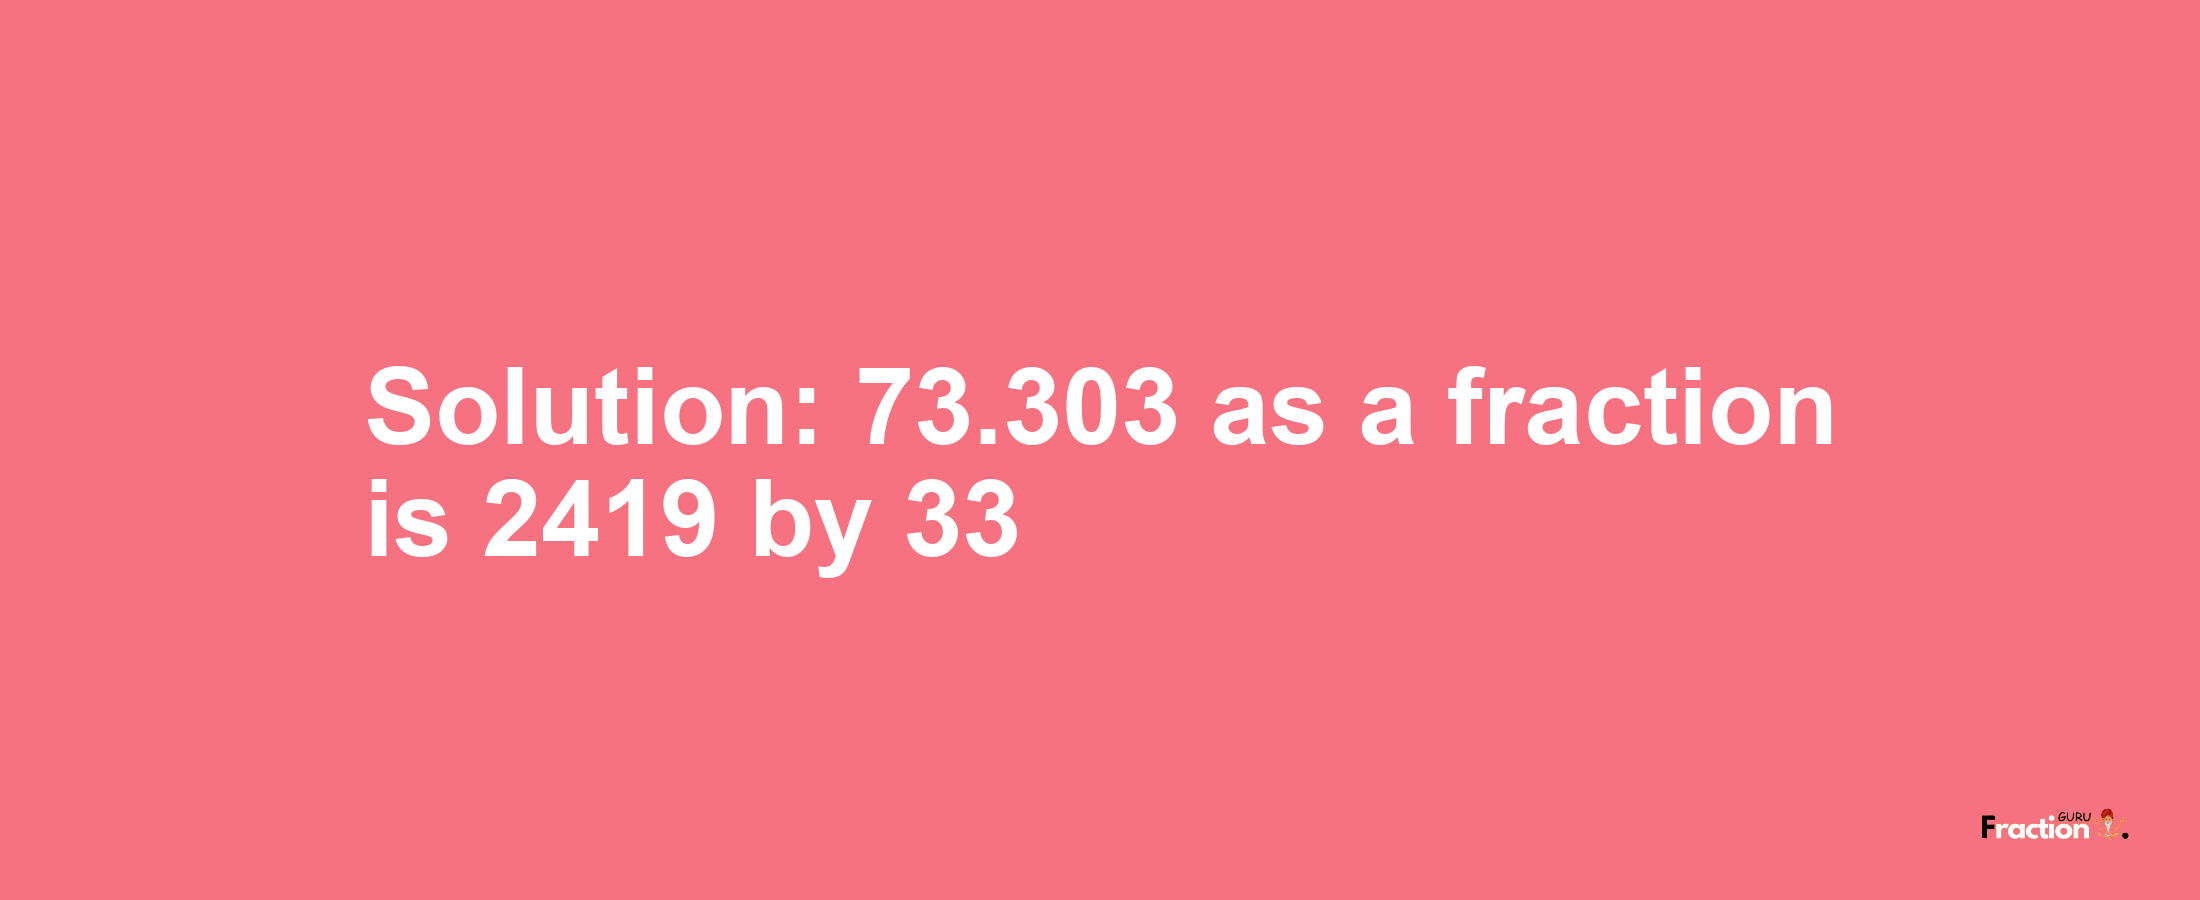 Solution:73.303 as a fraction is 2419/33